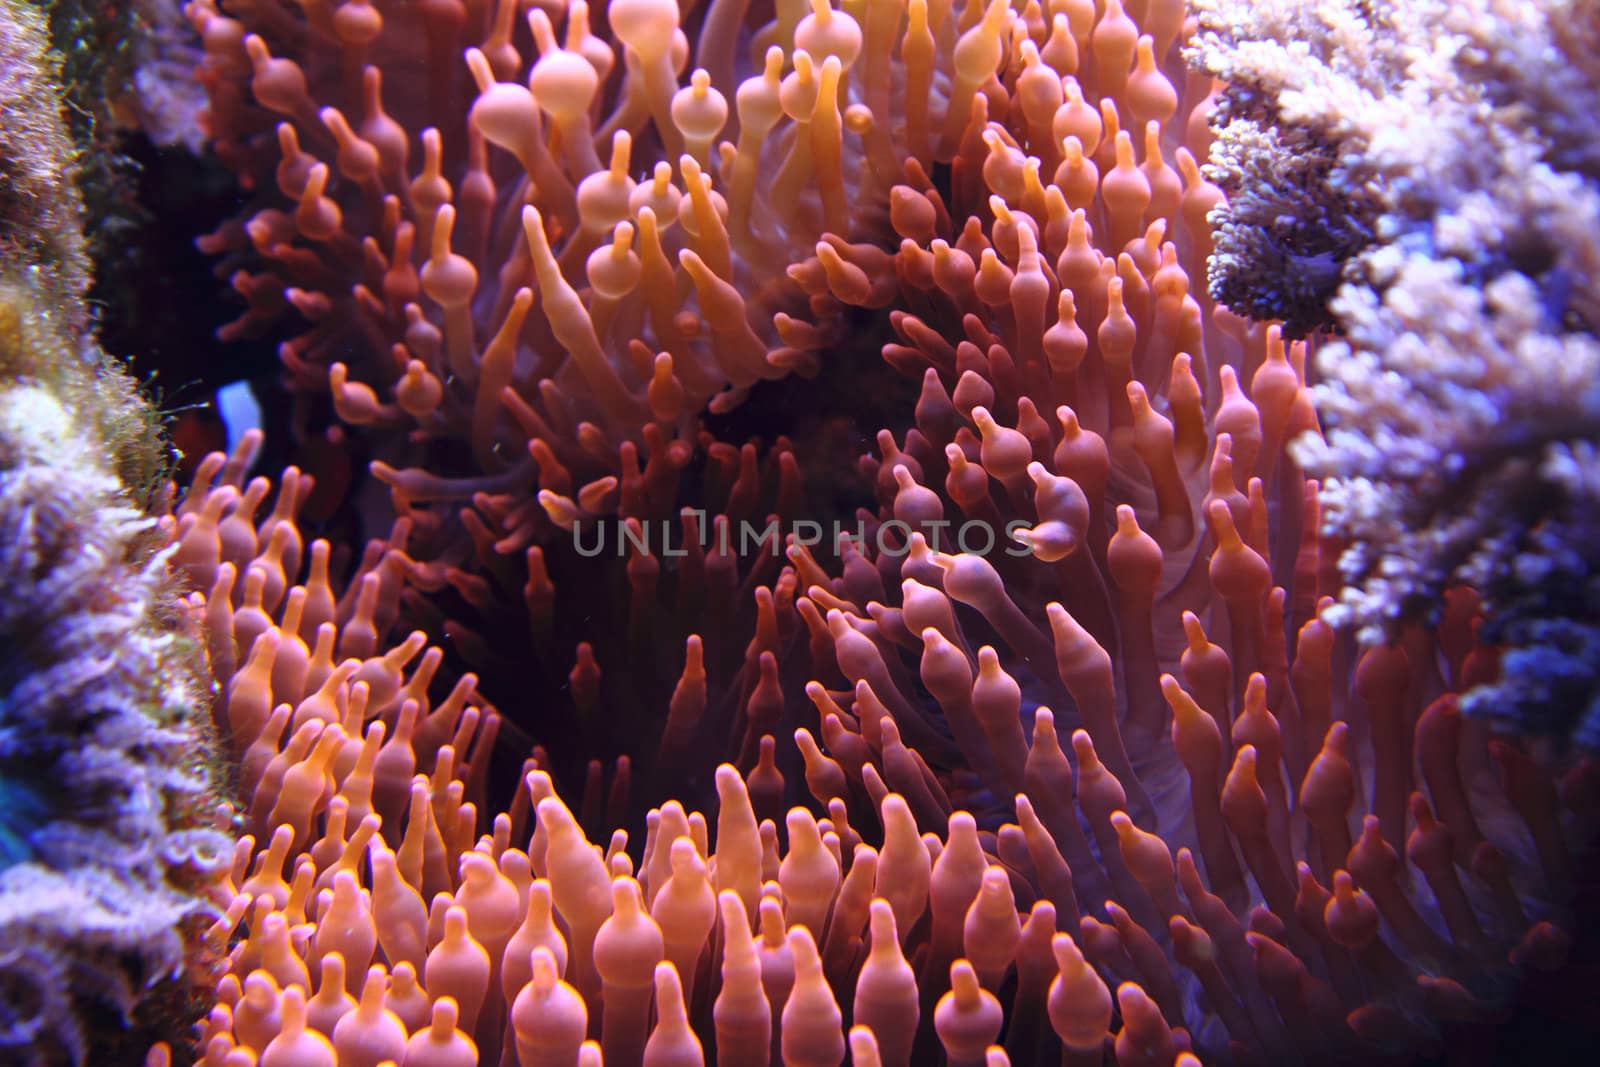 corals from the red sea as nice natural background